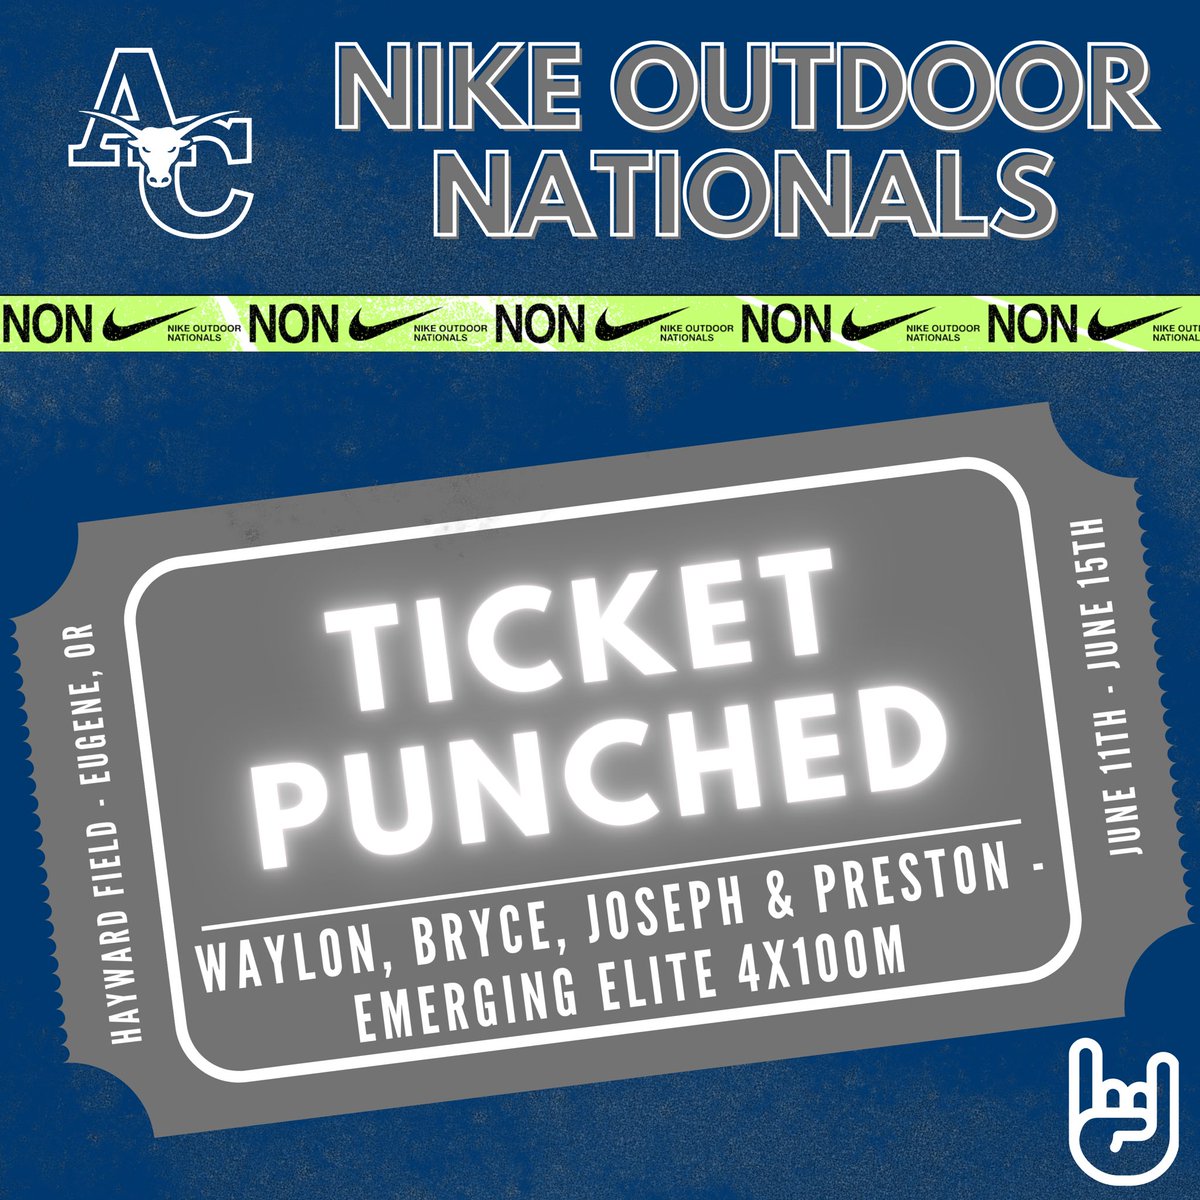 Waylon L, Bryce L, Joseph H & Preston M punched their ticket to NIKE OUTDOOR NATIONALS in the Emerging Elite 4x100m Relay by running a qualifying time in the 4x100m Relay at the Dale Legg Invitational. We are so proud of you Waylon, Bryce, Joseph and Preston! #gomavericks